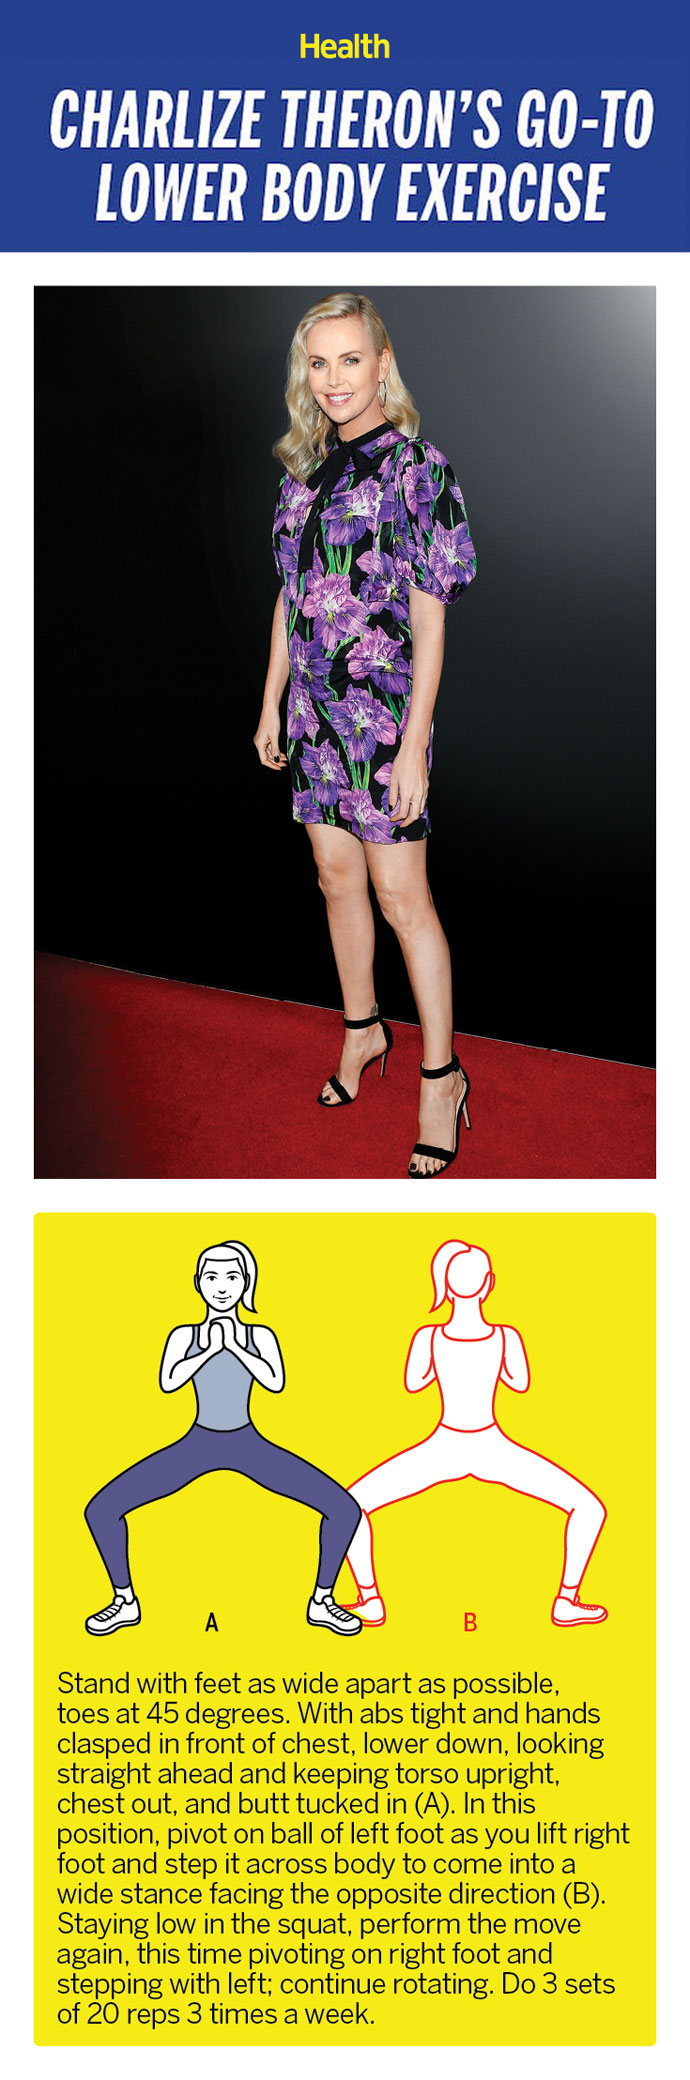 charlize-theron-exercise-graphic